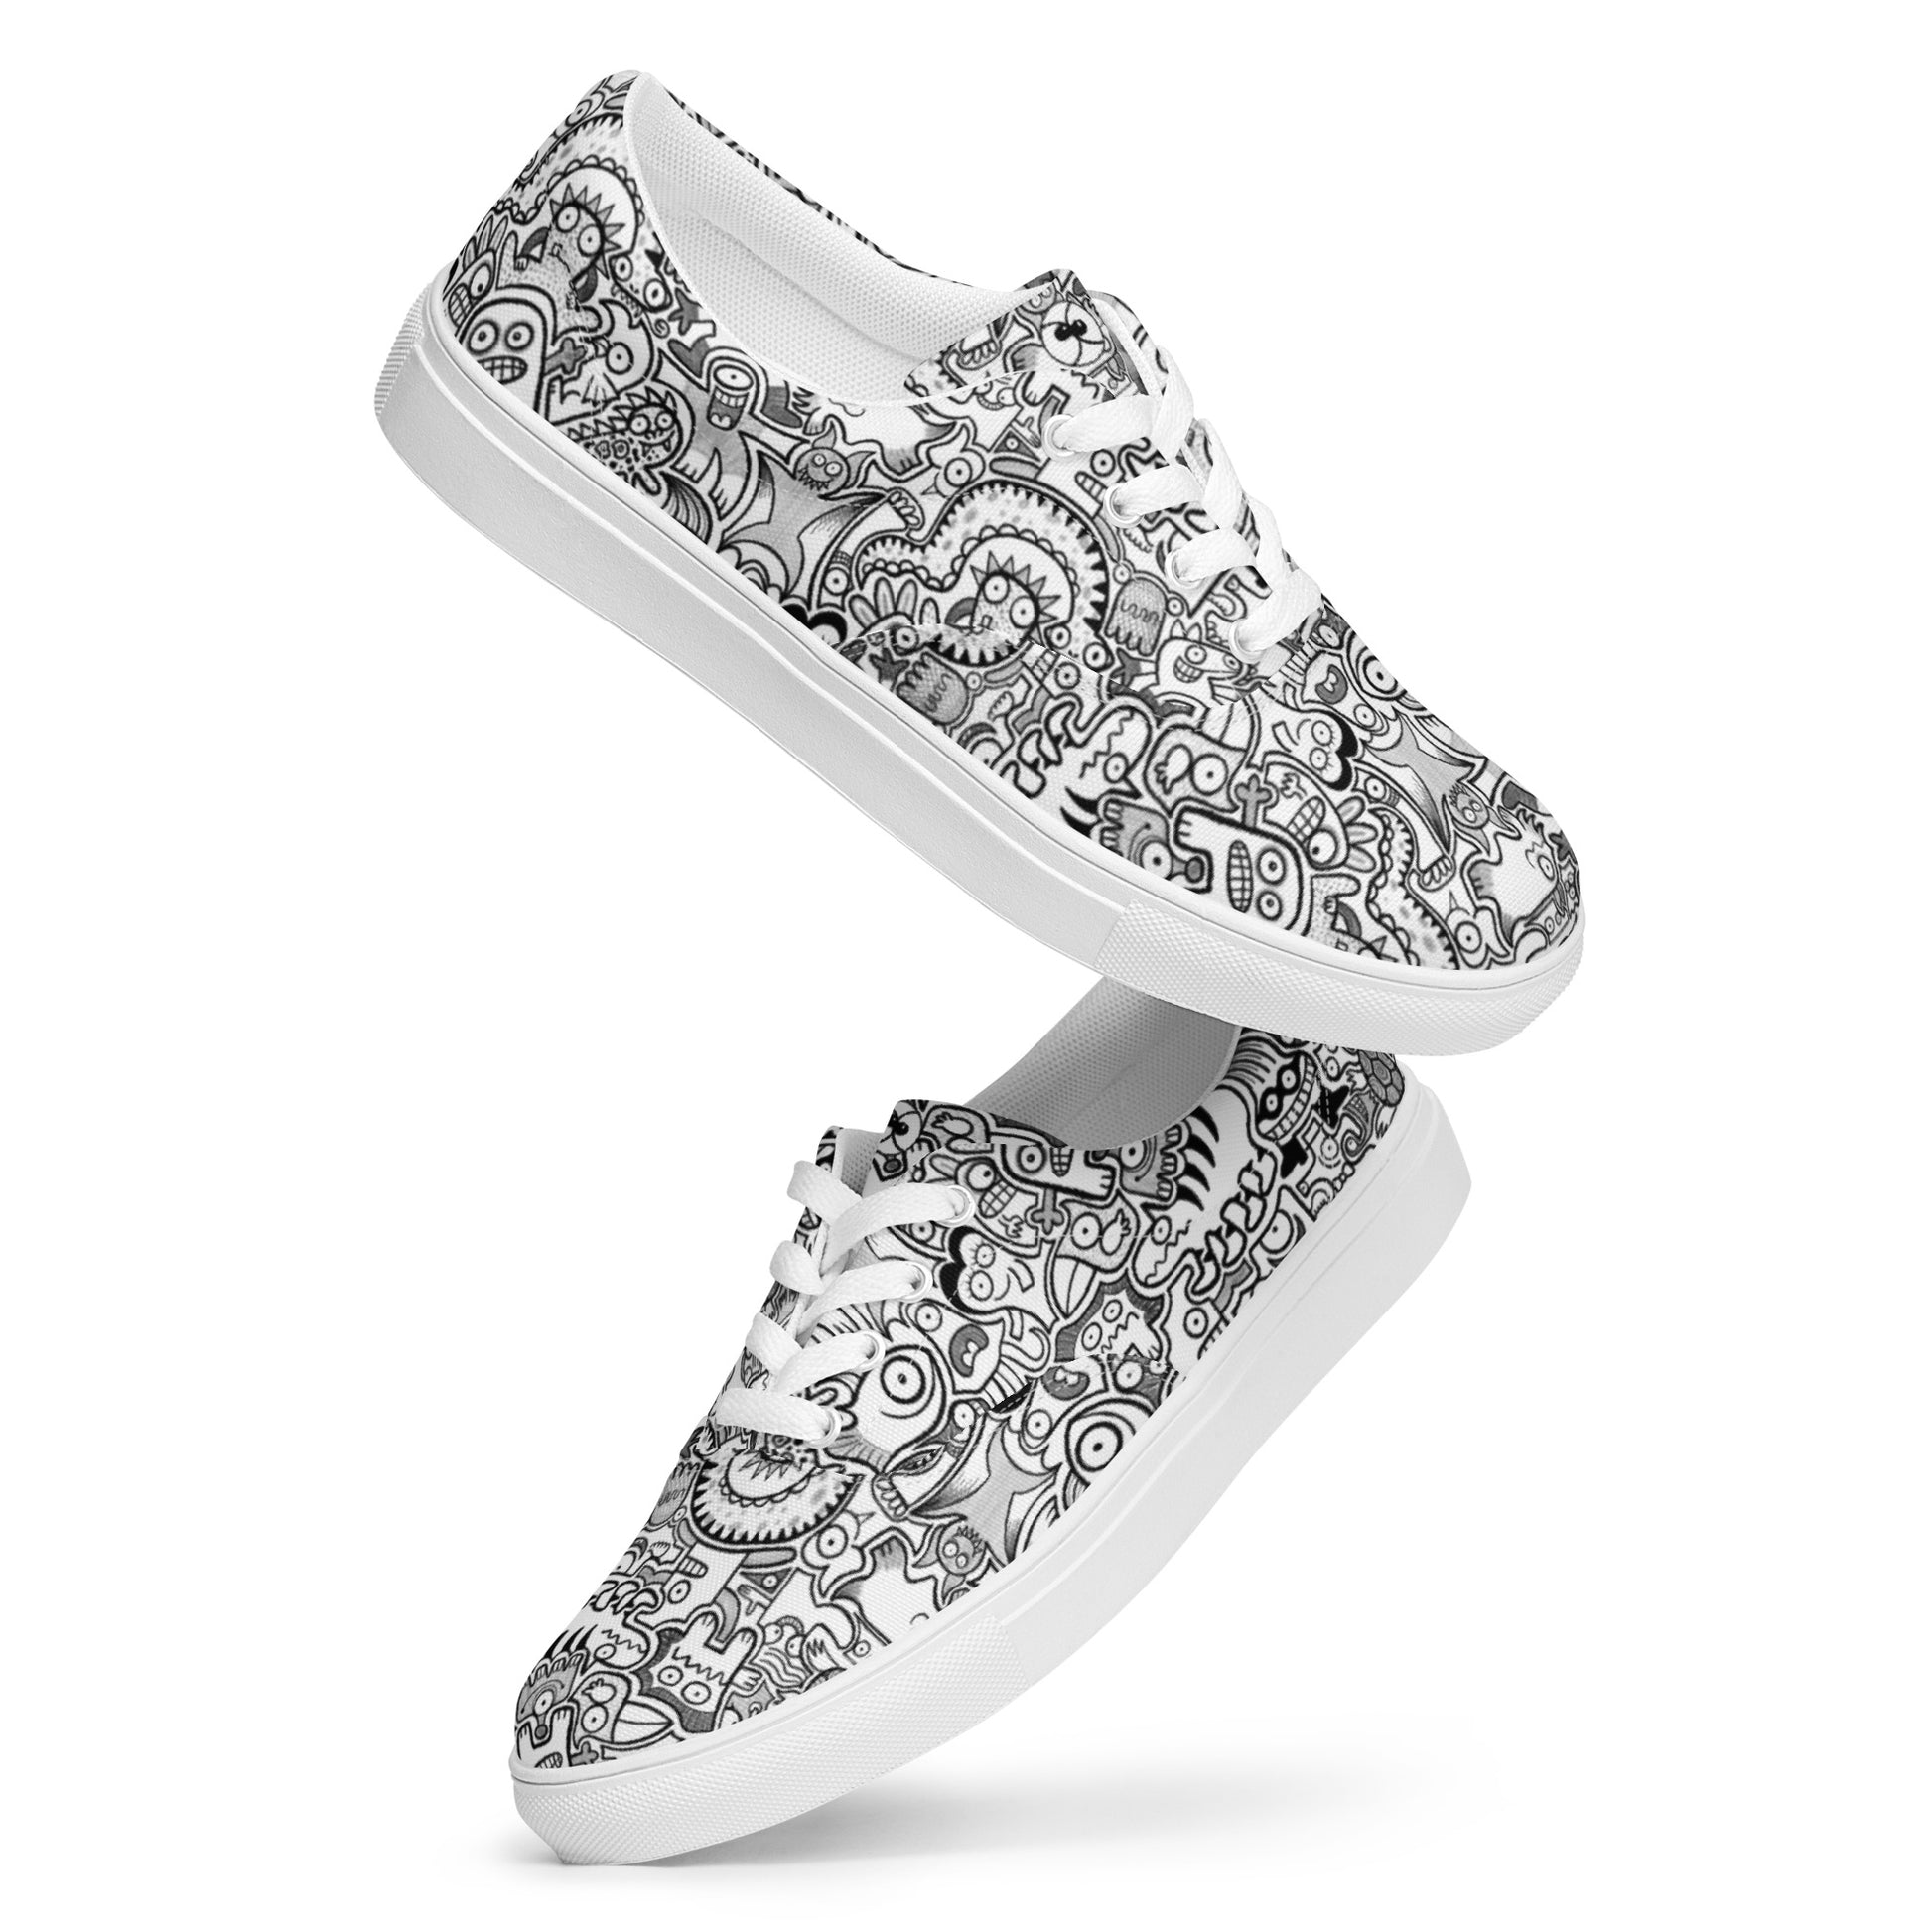 Fill your world with cool doodles Men’s lace-up canvas shoes. Playing with shoes